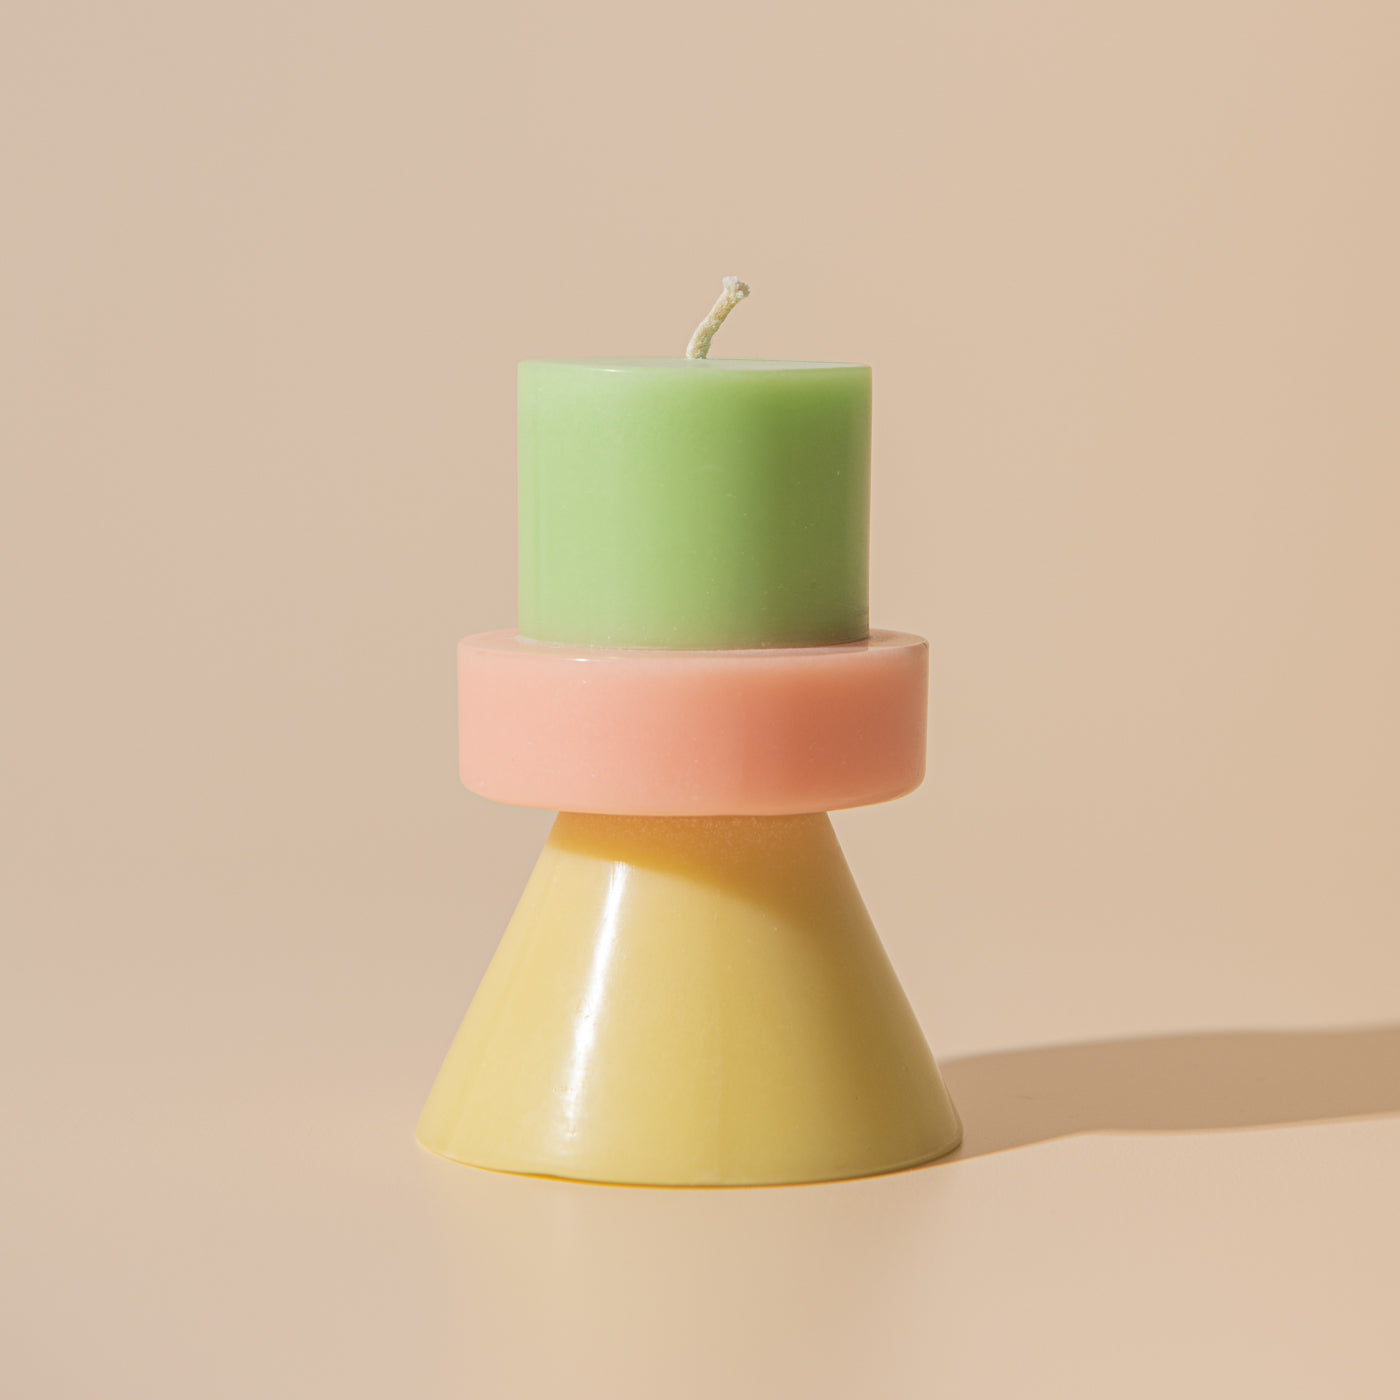 Stack Candle mini by Yod and co in green, pink and yellow